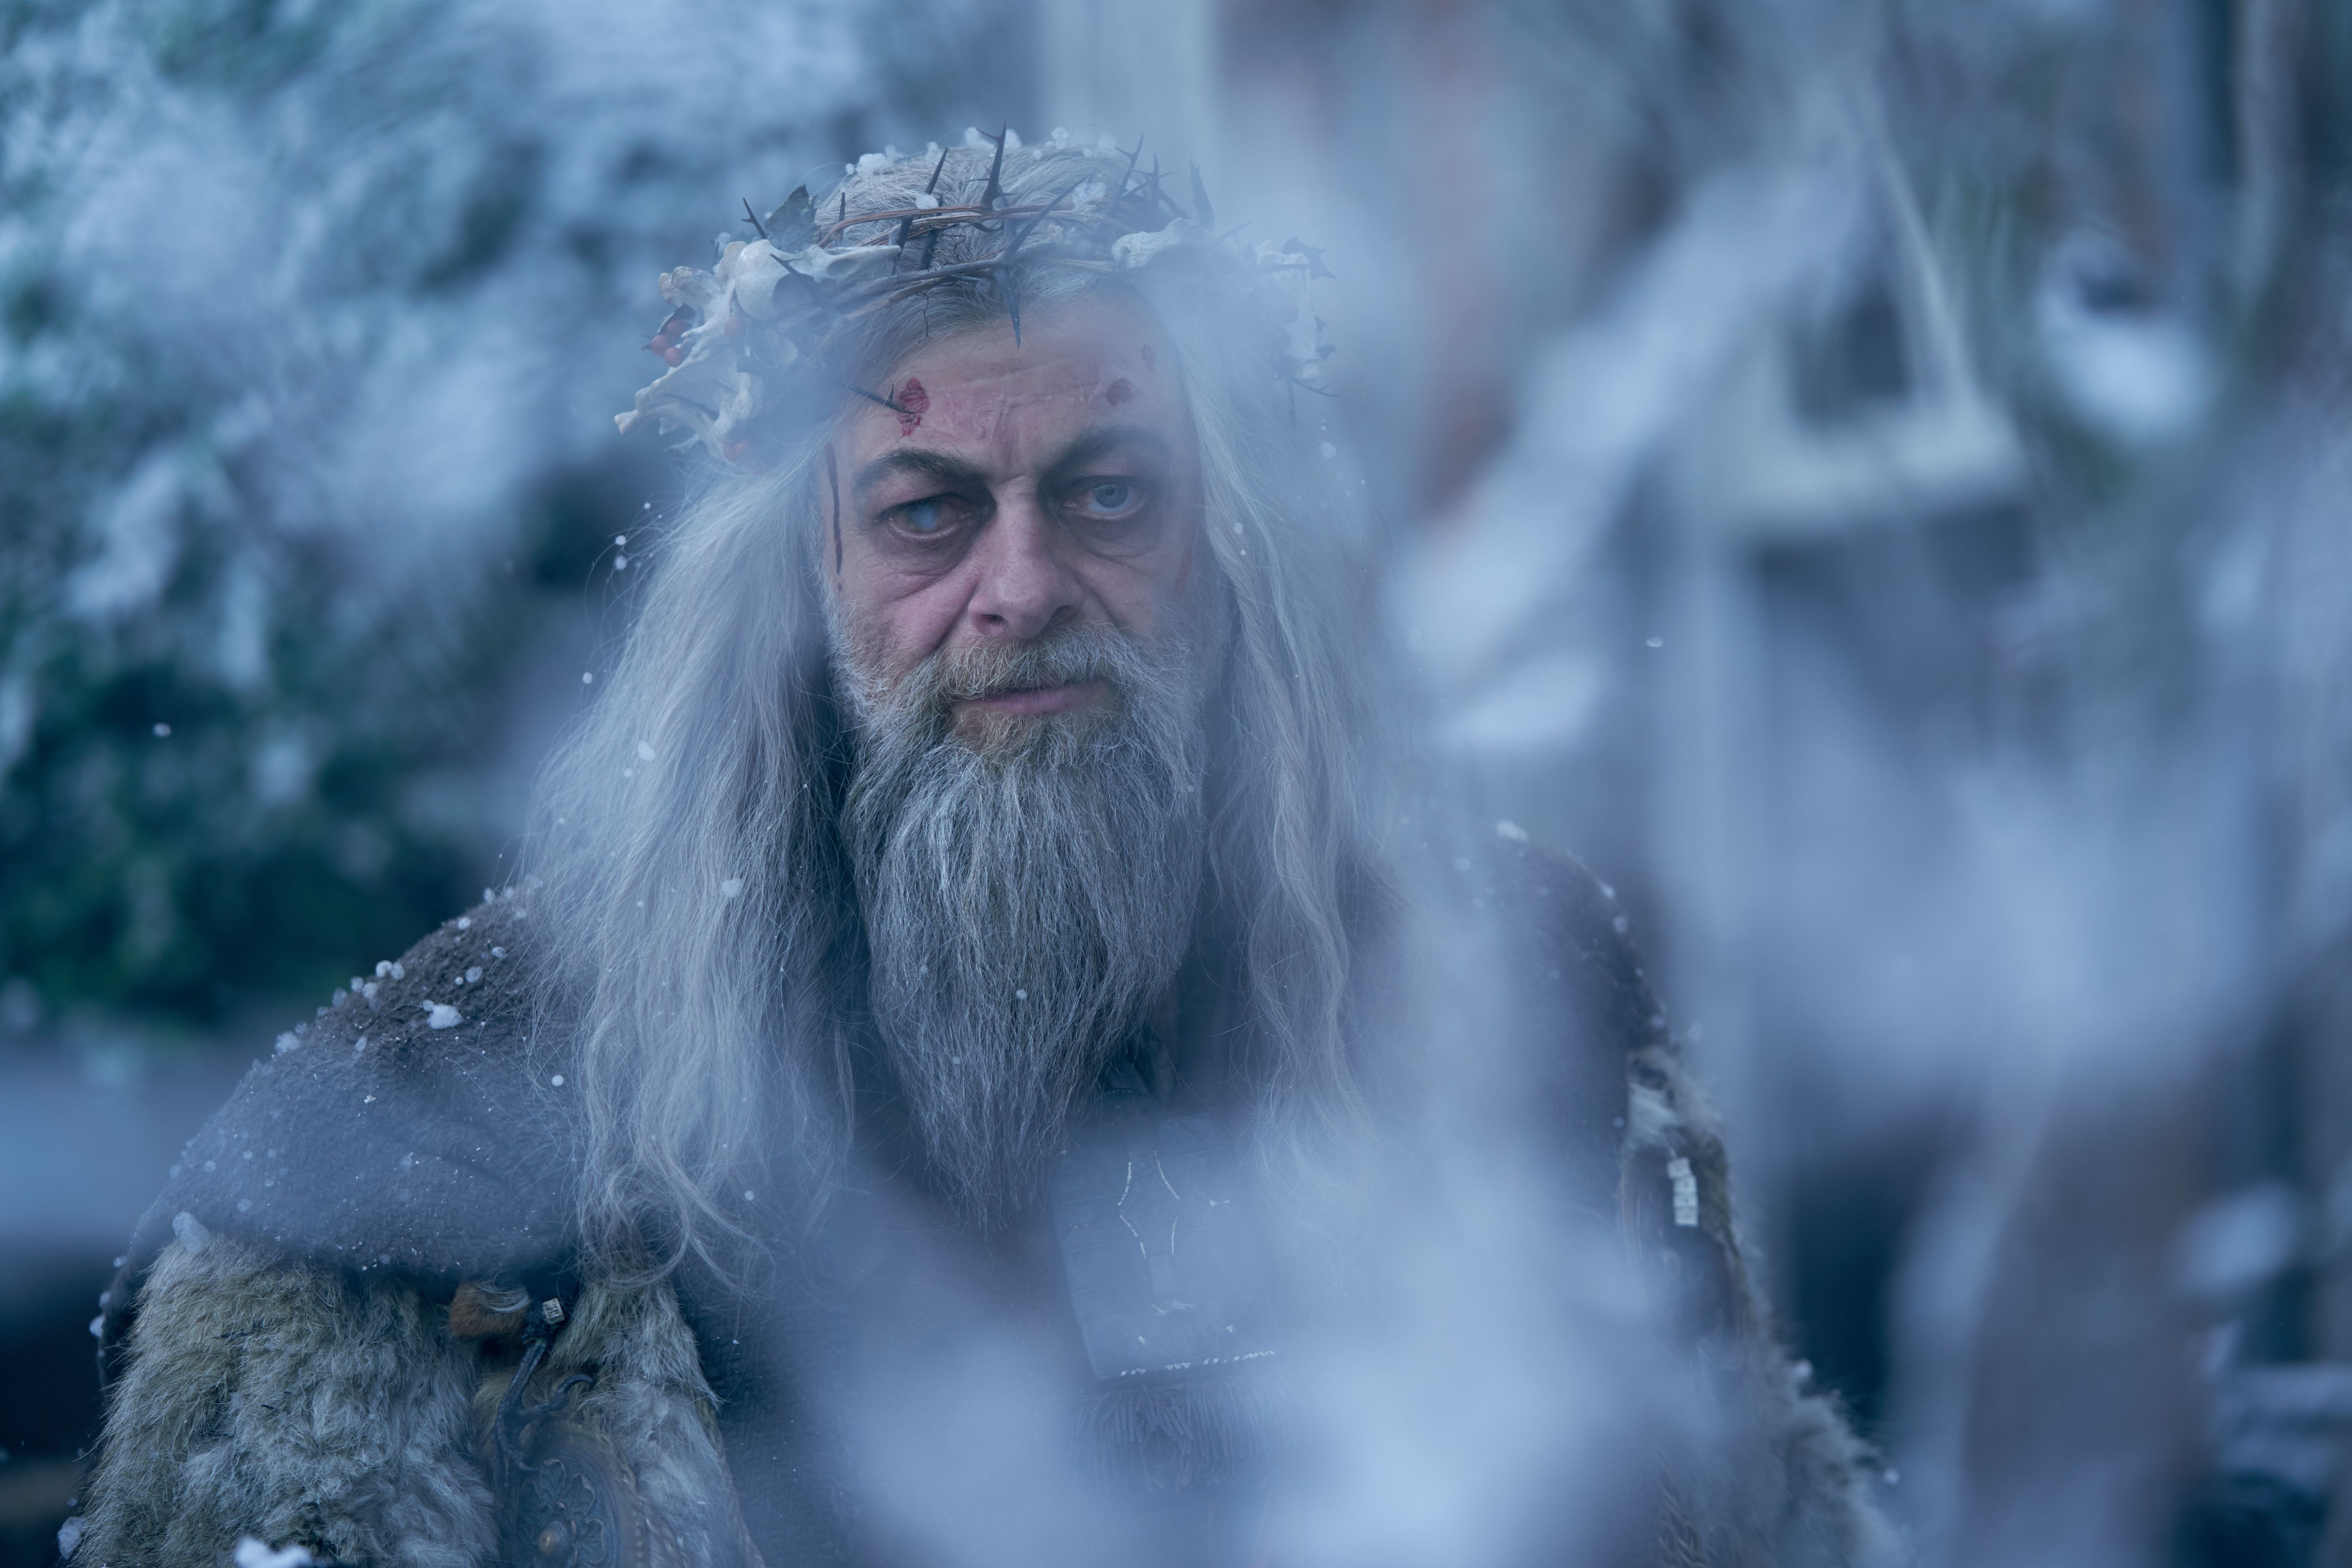 The ever-chilling Andy Serkis as the Ghost of Christmas Past